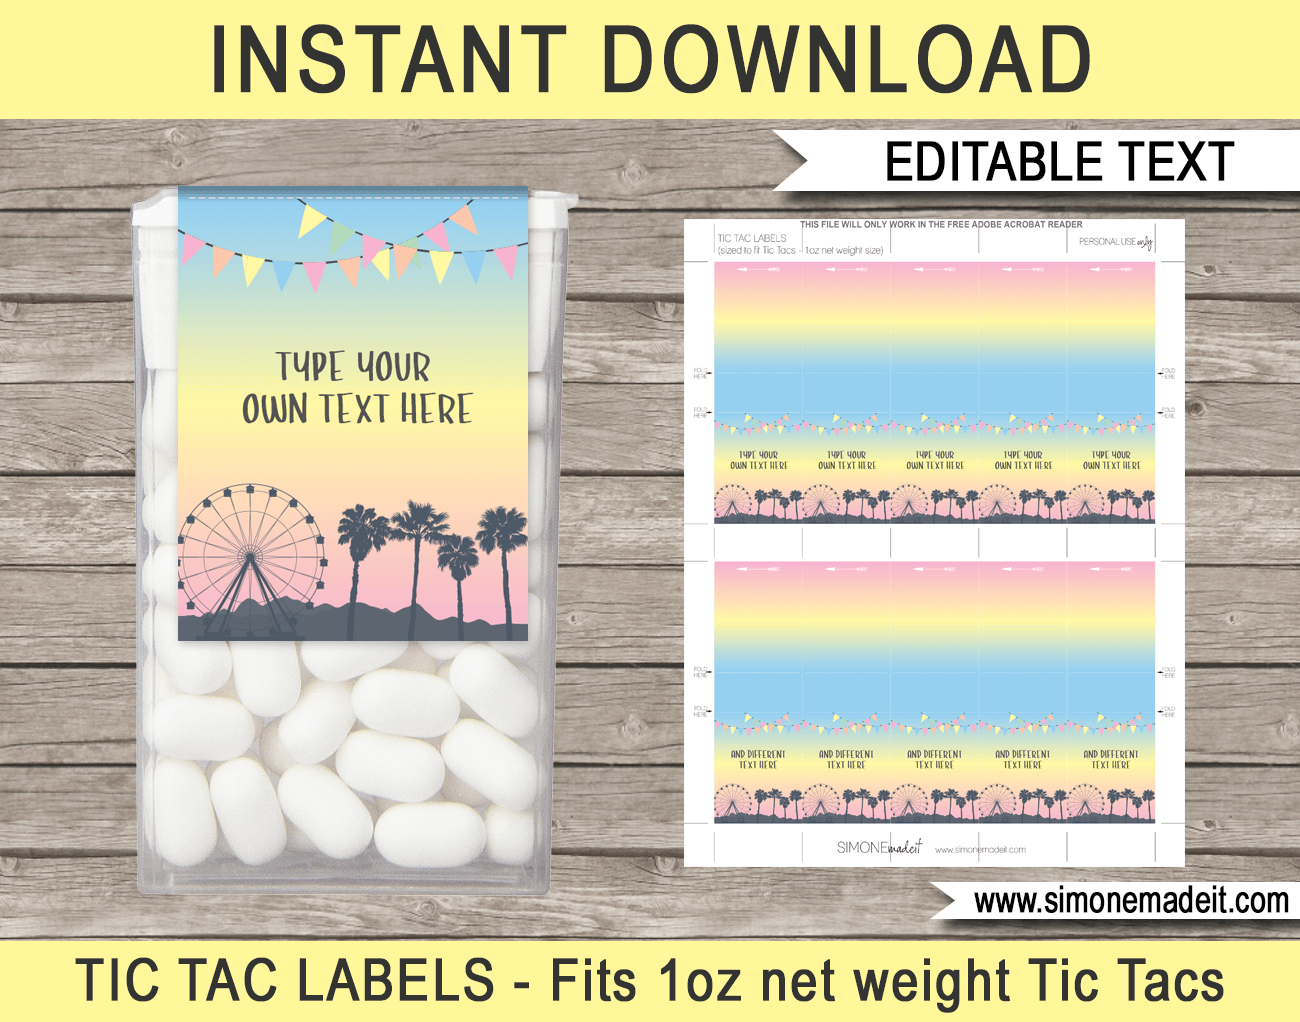 Festival Themed Party Tic Tac Labels | Festival Birthday Party Favors | Editable & Printable Template | Instant Download via simonemadeit.com